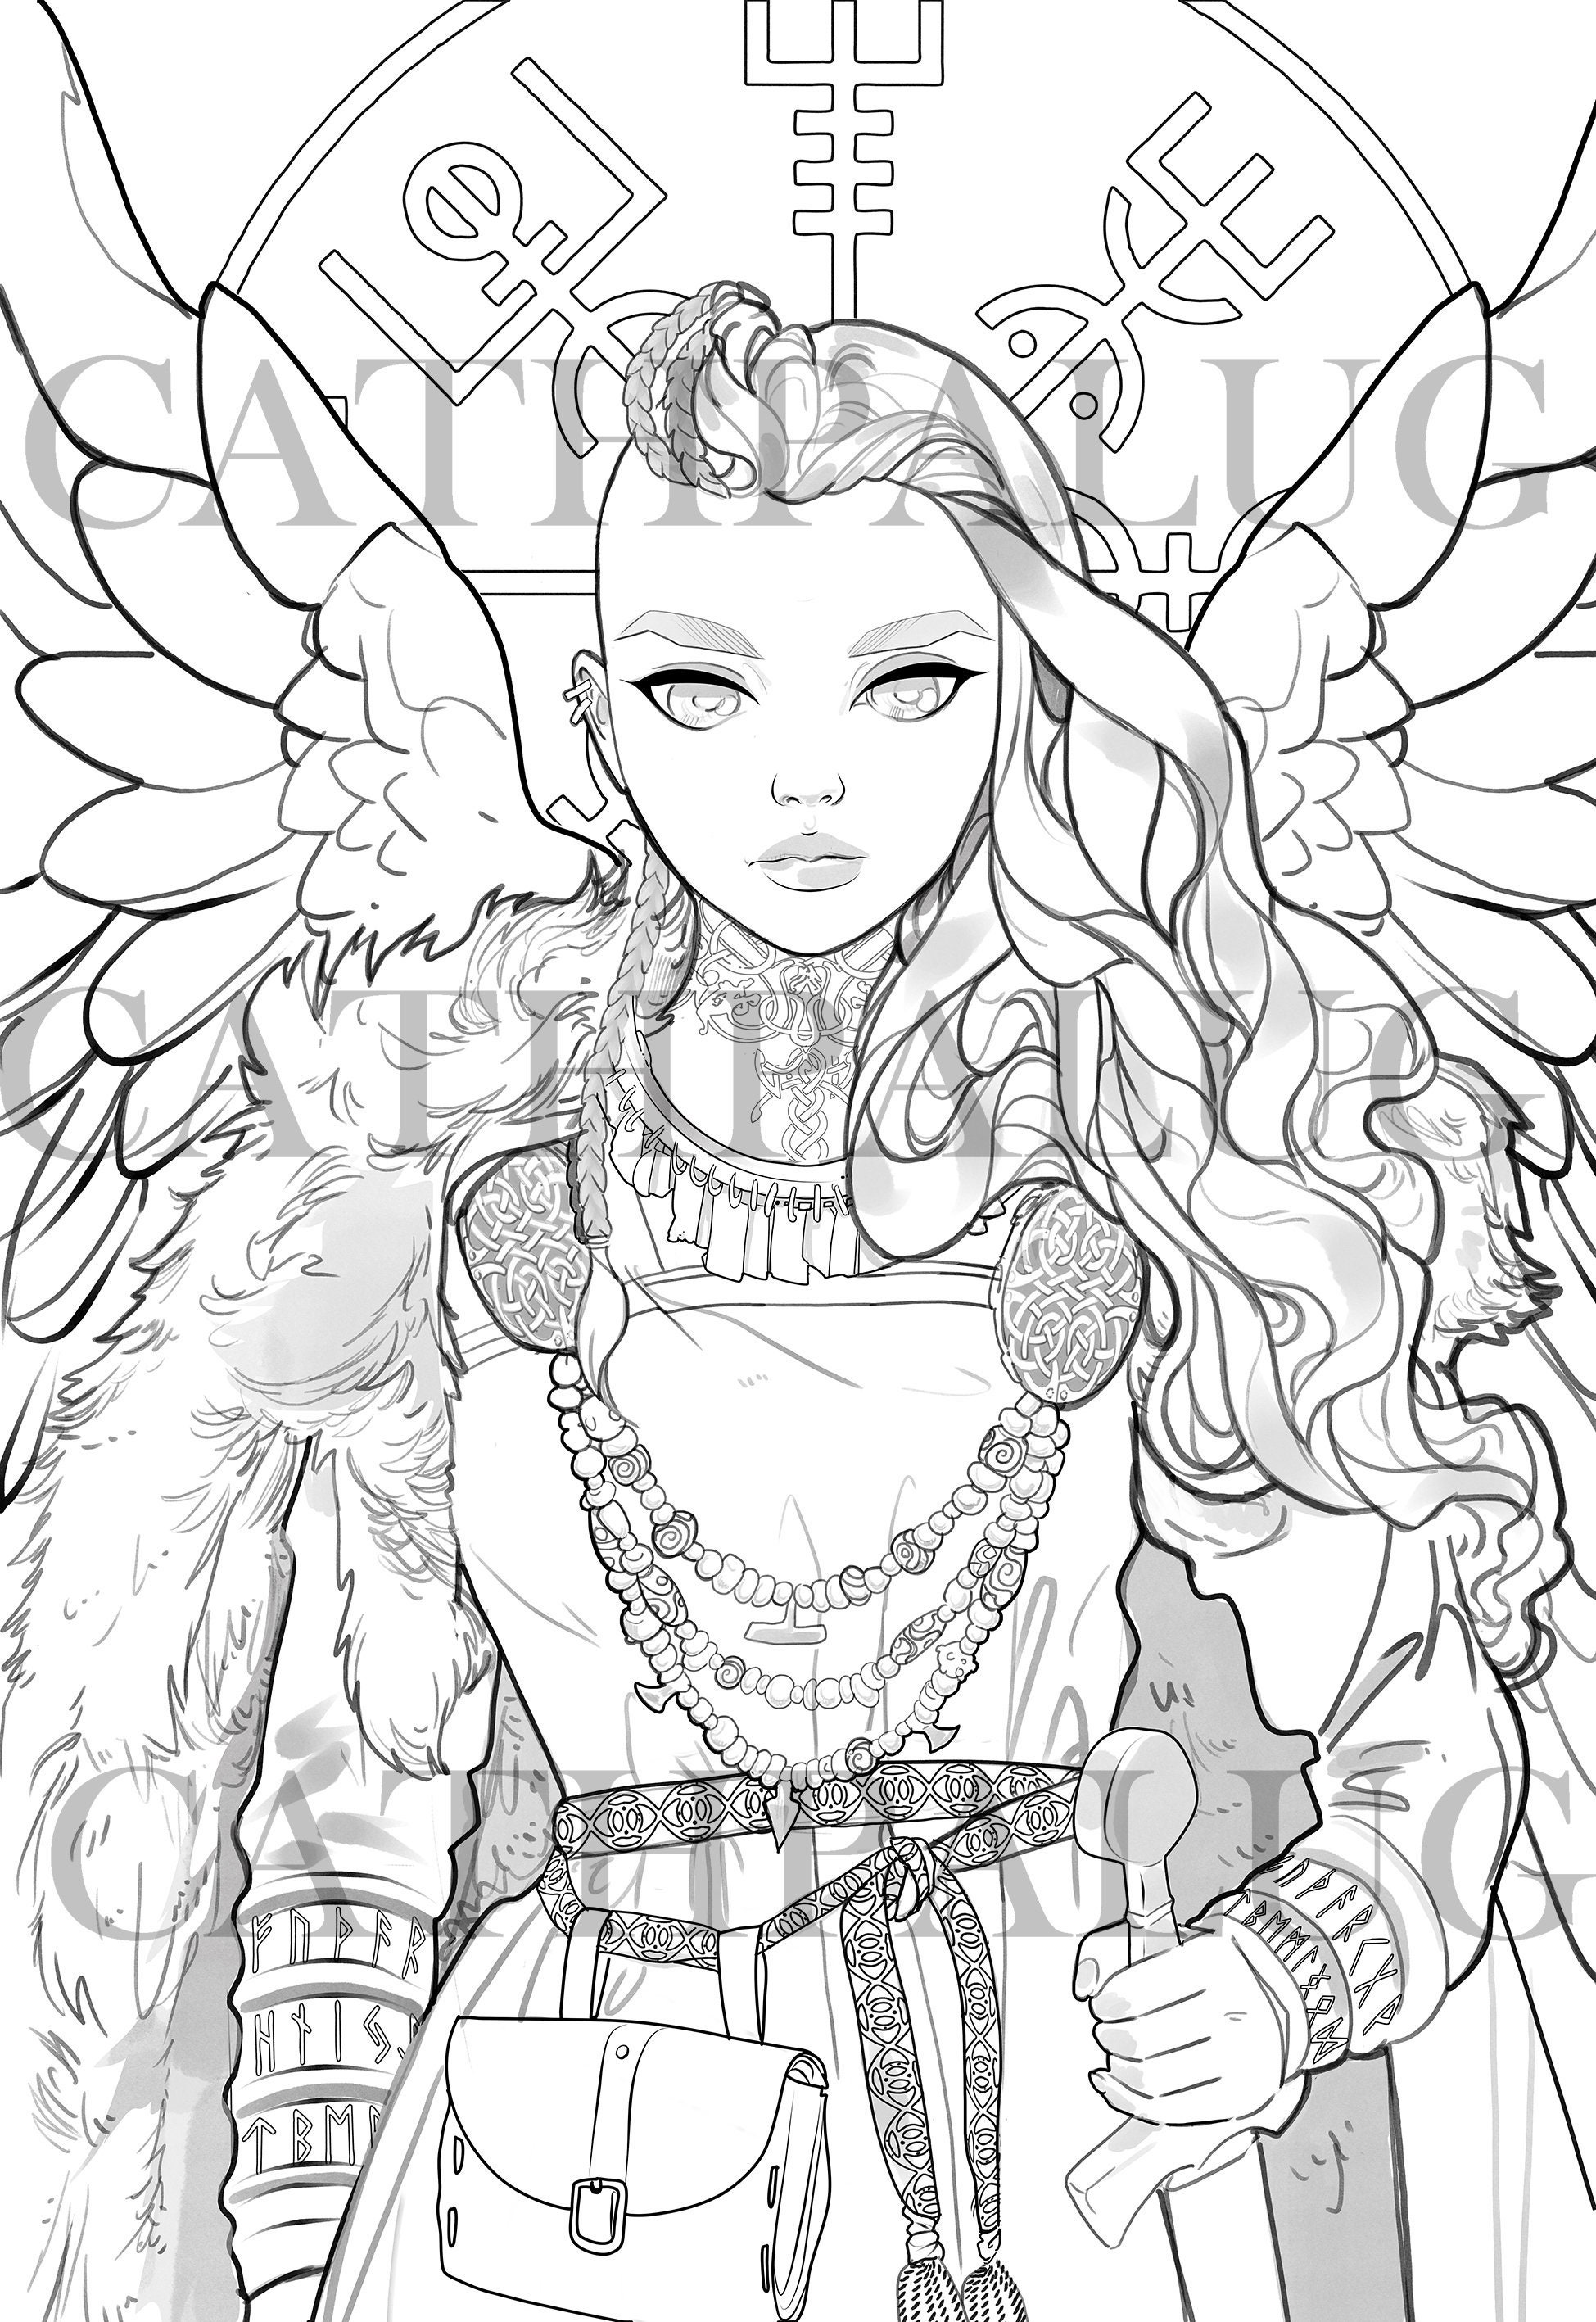 Digital stamp frigg freya goddess norse mythology queen coloring book line art valkyrie adult coloring page